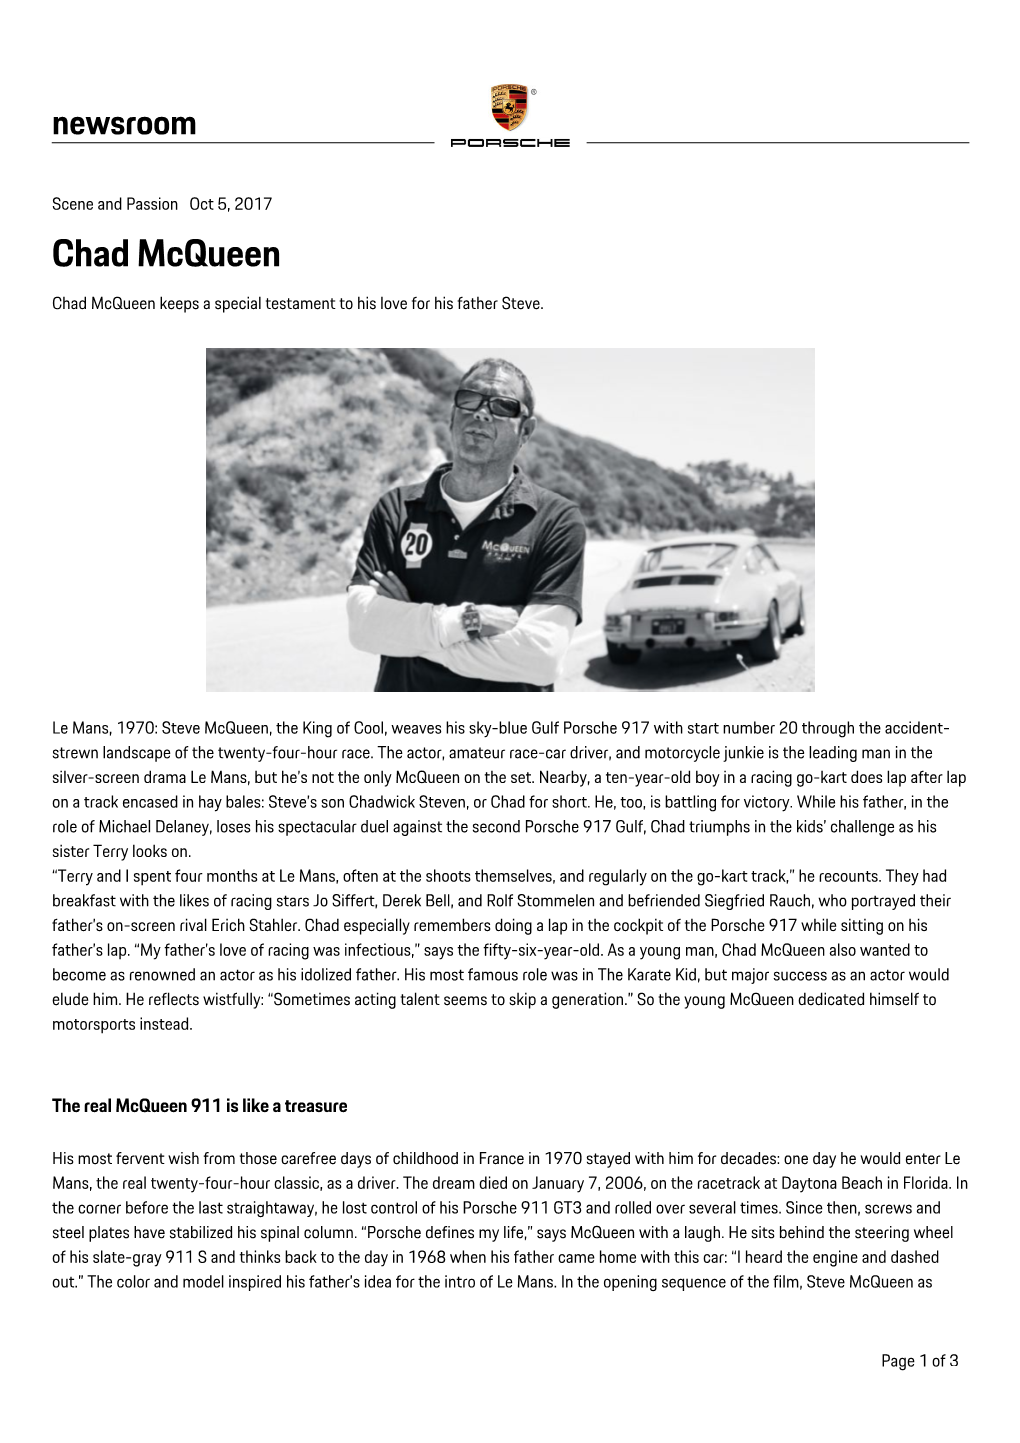 Chad Mcqueen Chad Mcqueen Keeps a Special Testament to His Love for His Father Steve